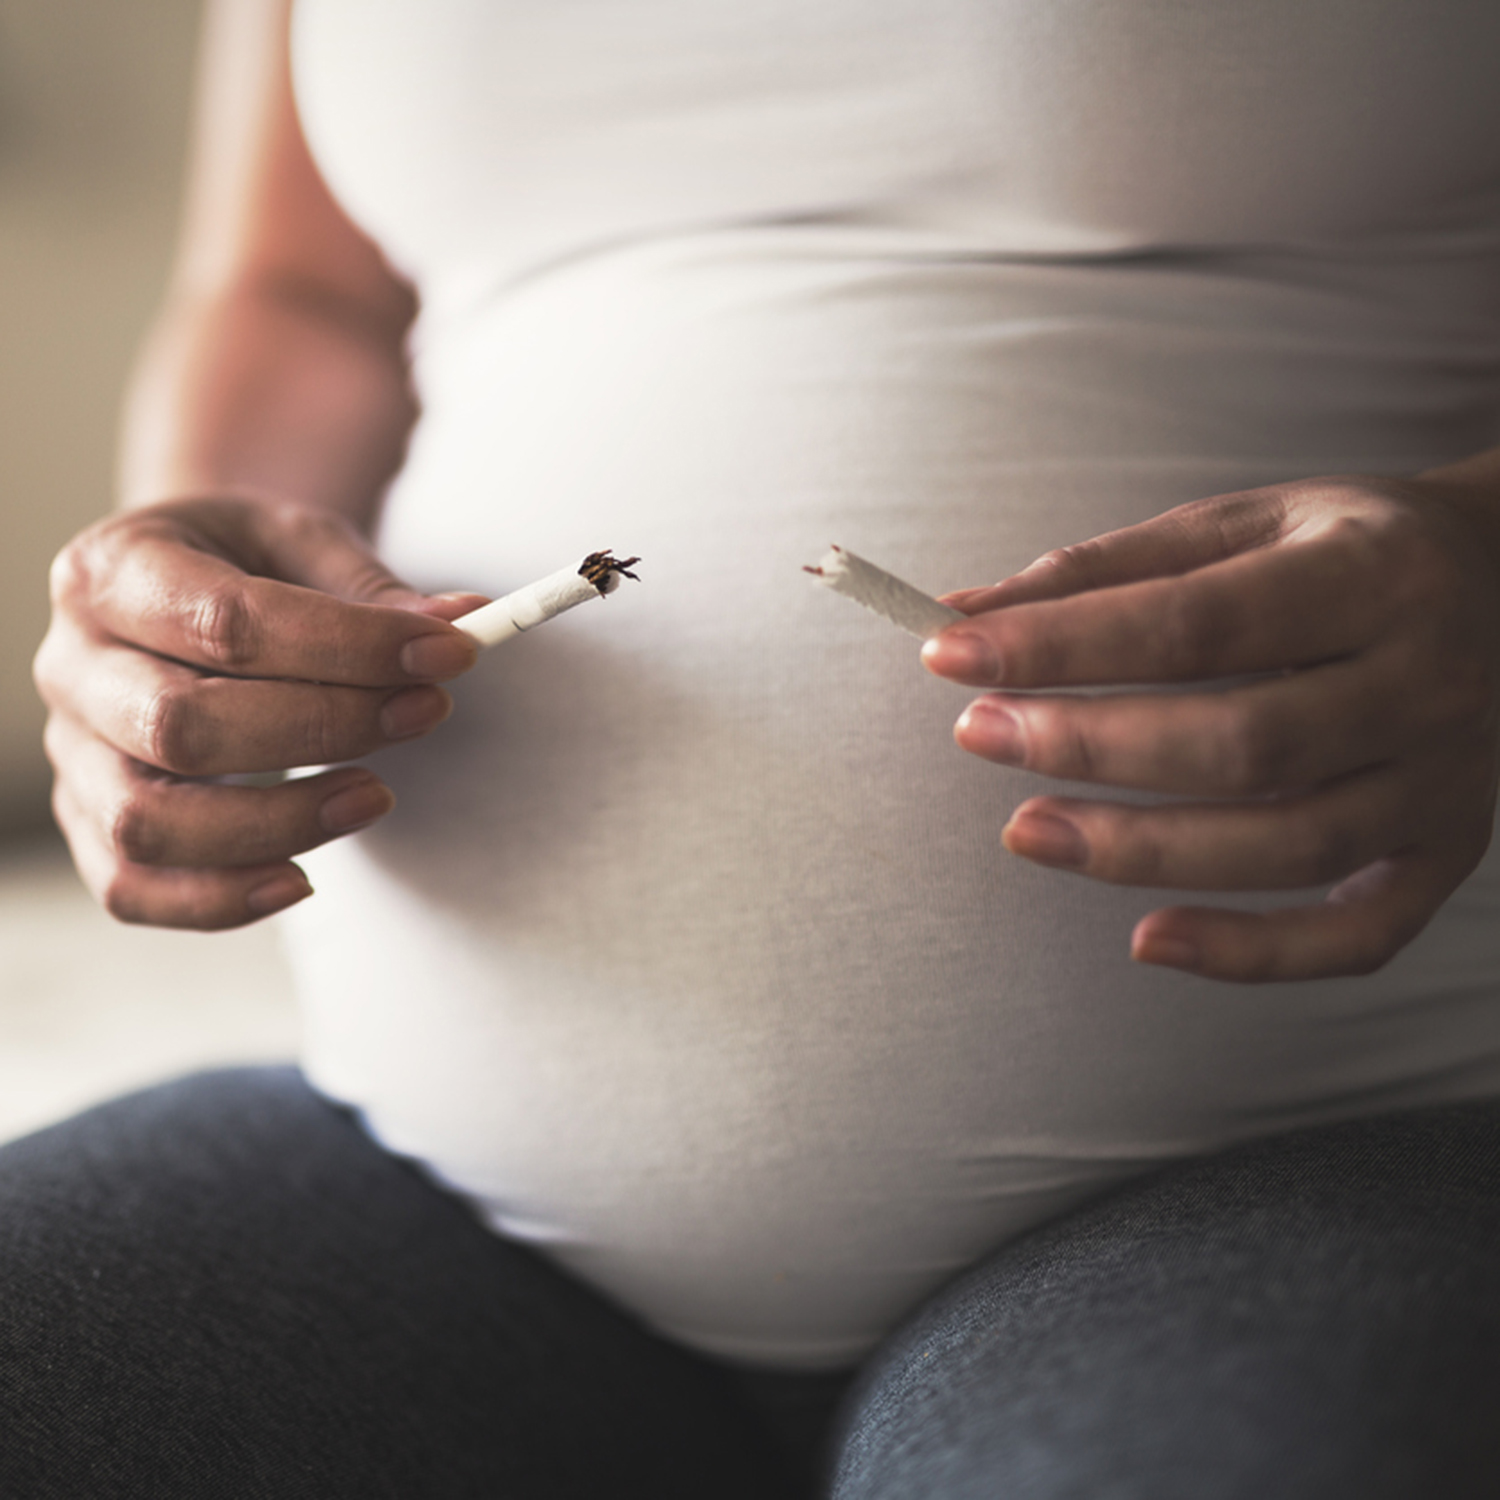 Nicotine replacement in pregnancy: Safer than smoking